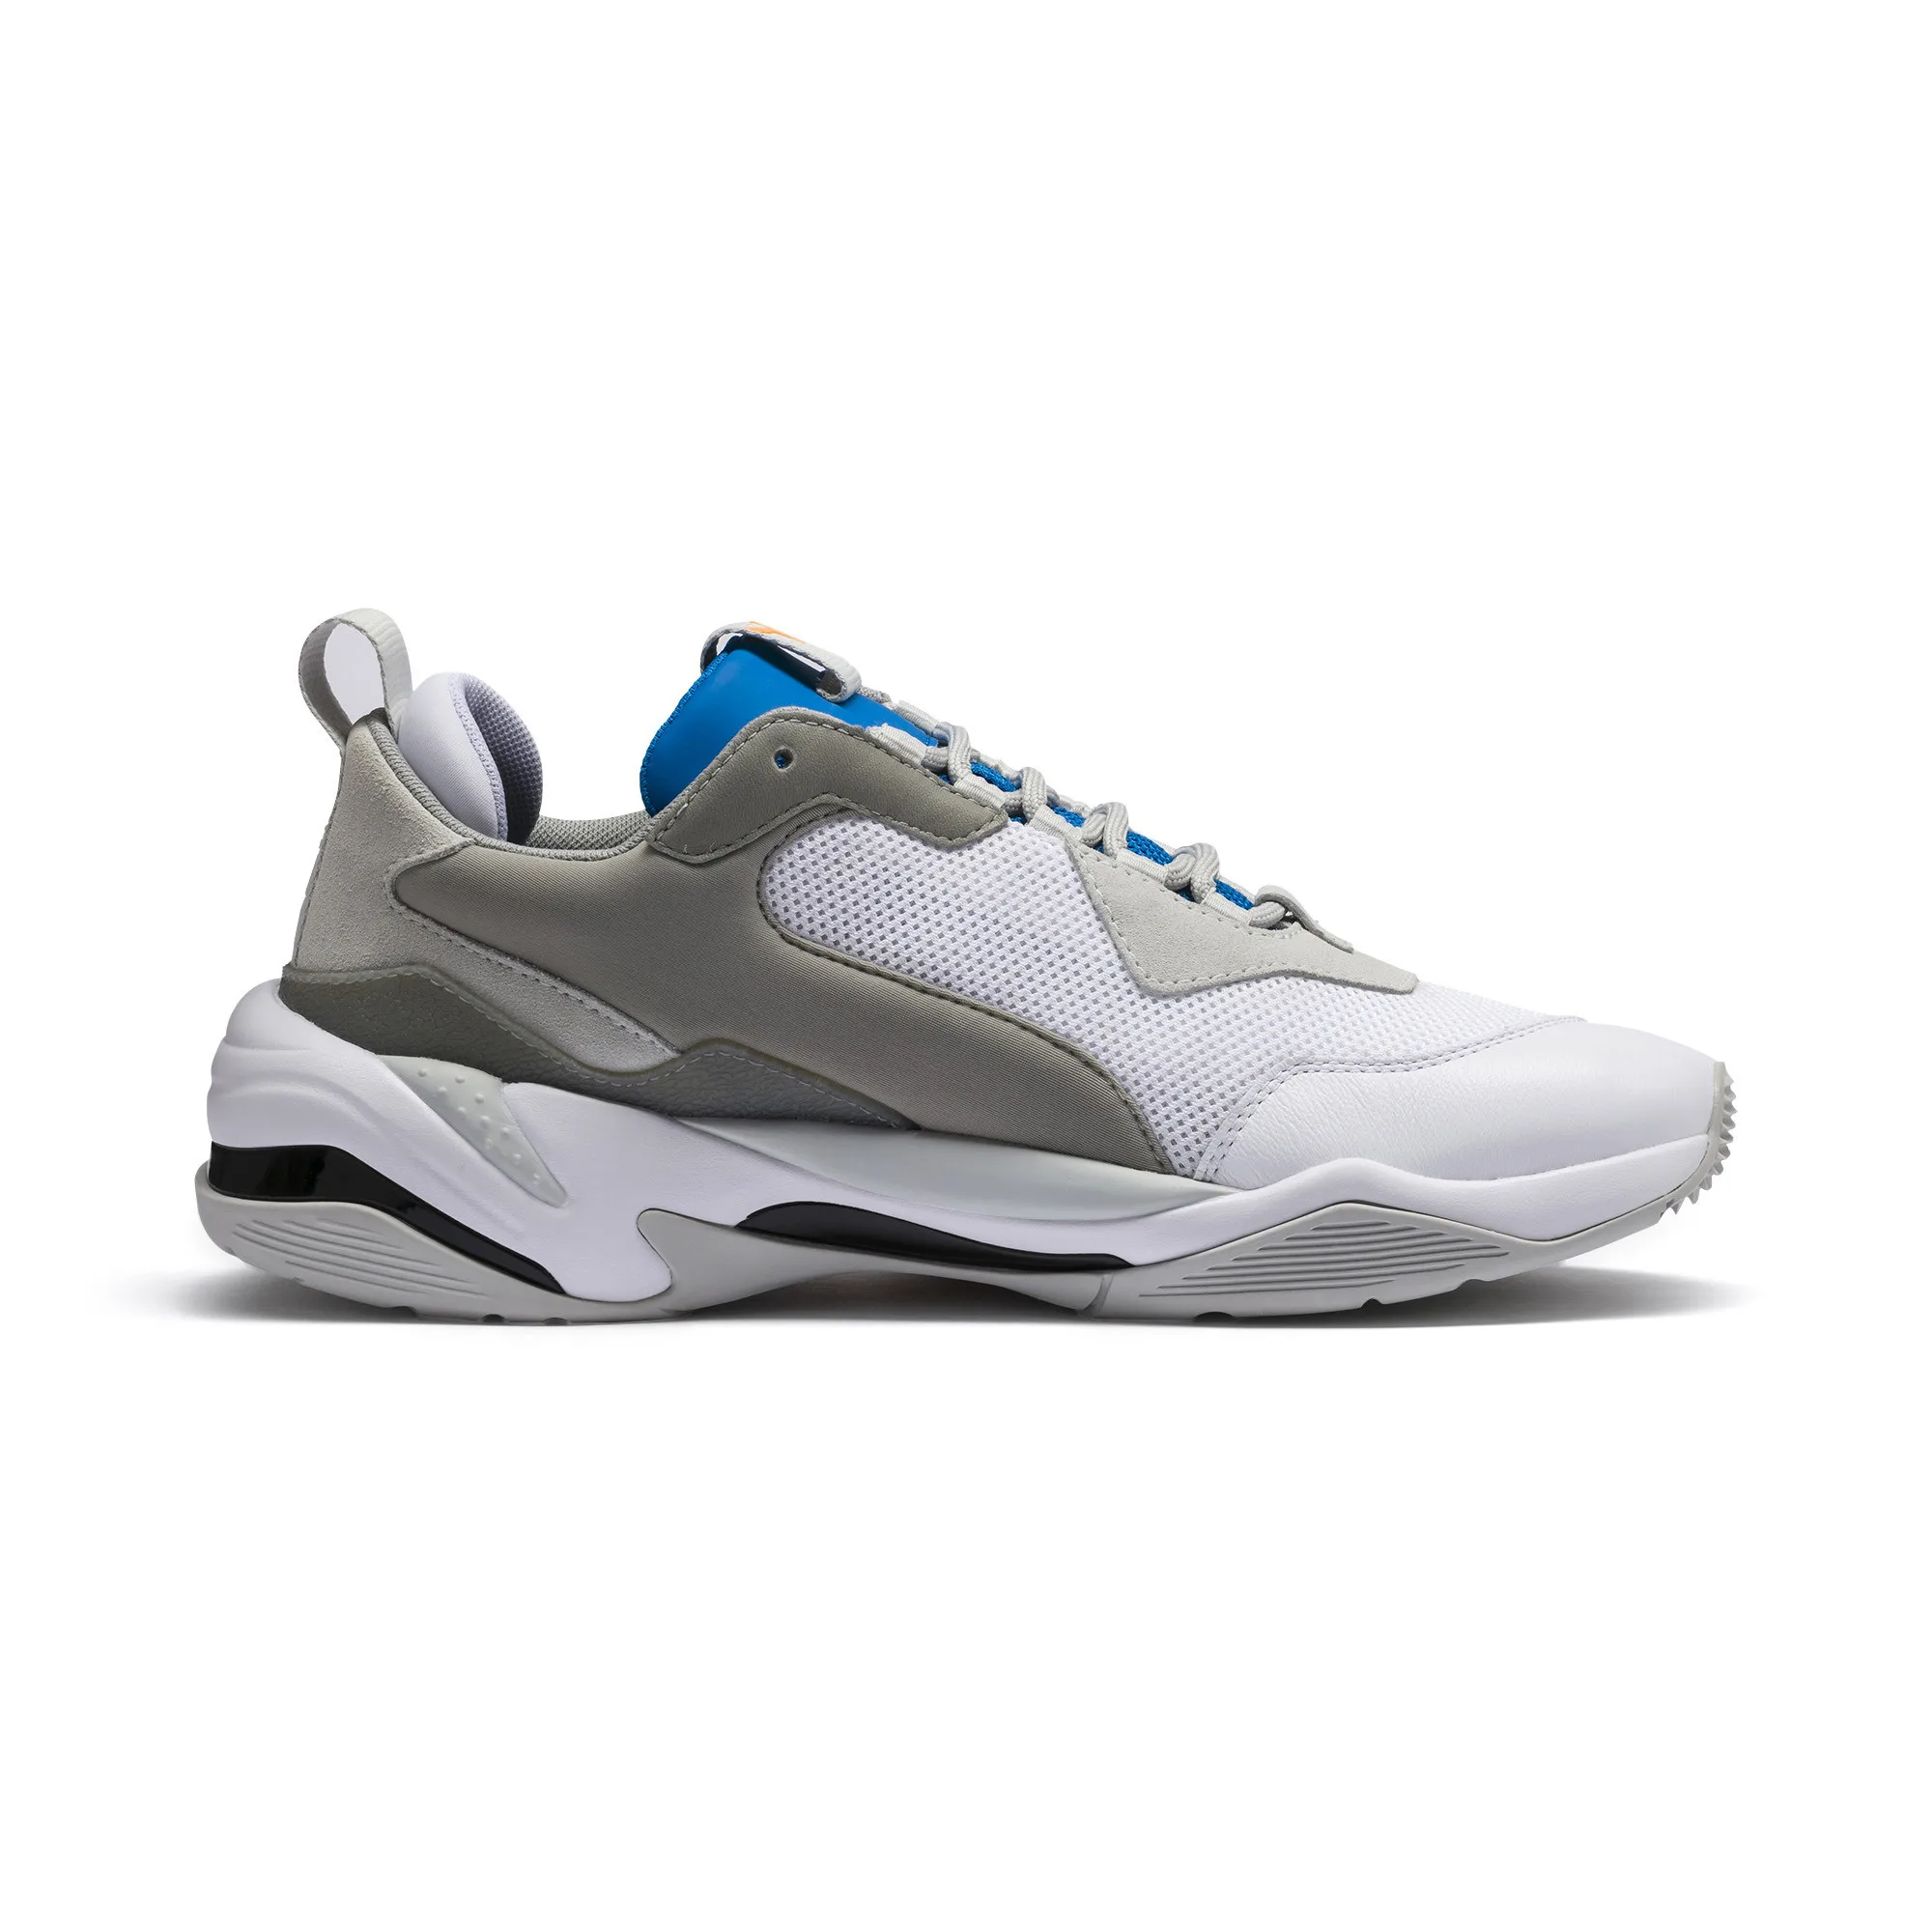 Sneakers Puma Thunder Men's Sports Shoes For Walking And Male Пума Cougar Puma Puma - Men's Vulcanize Shoes - AliExpress